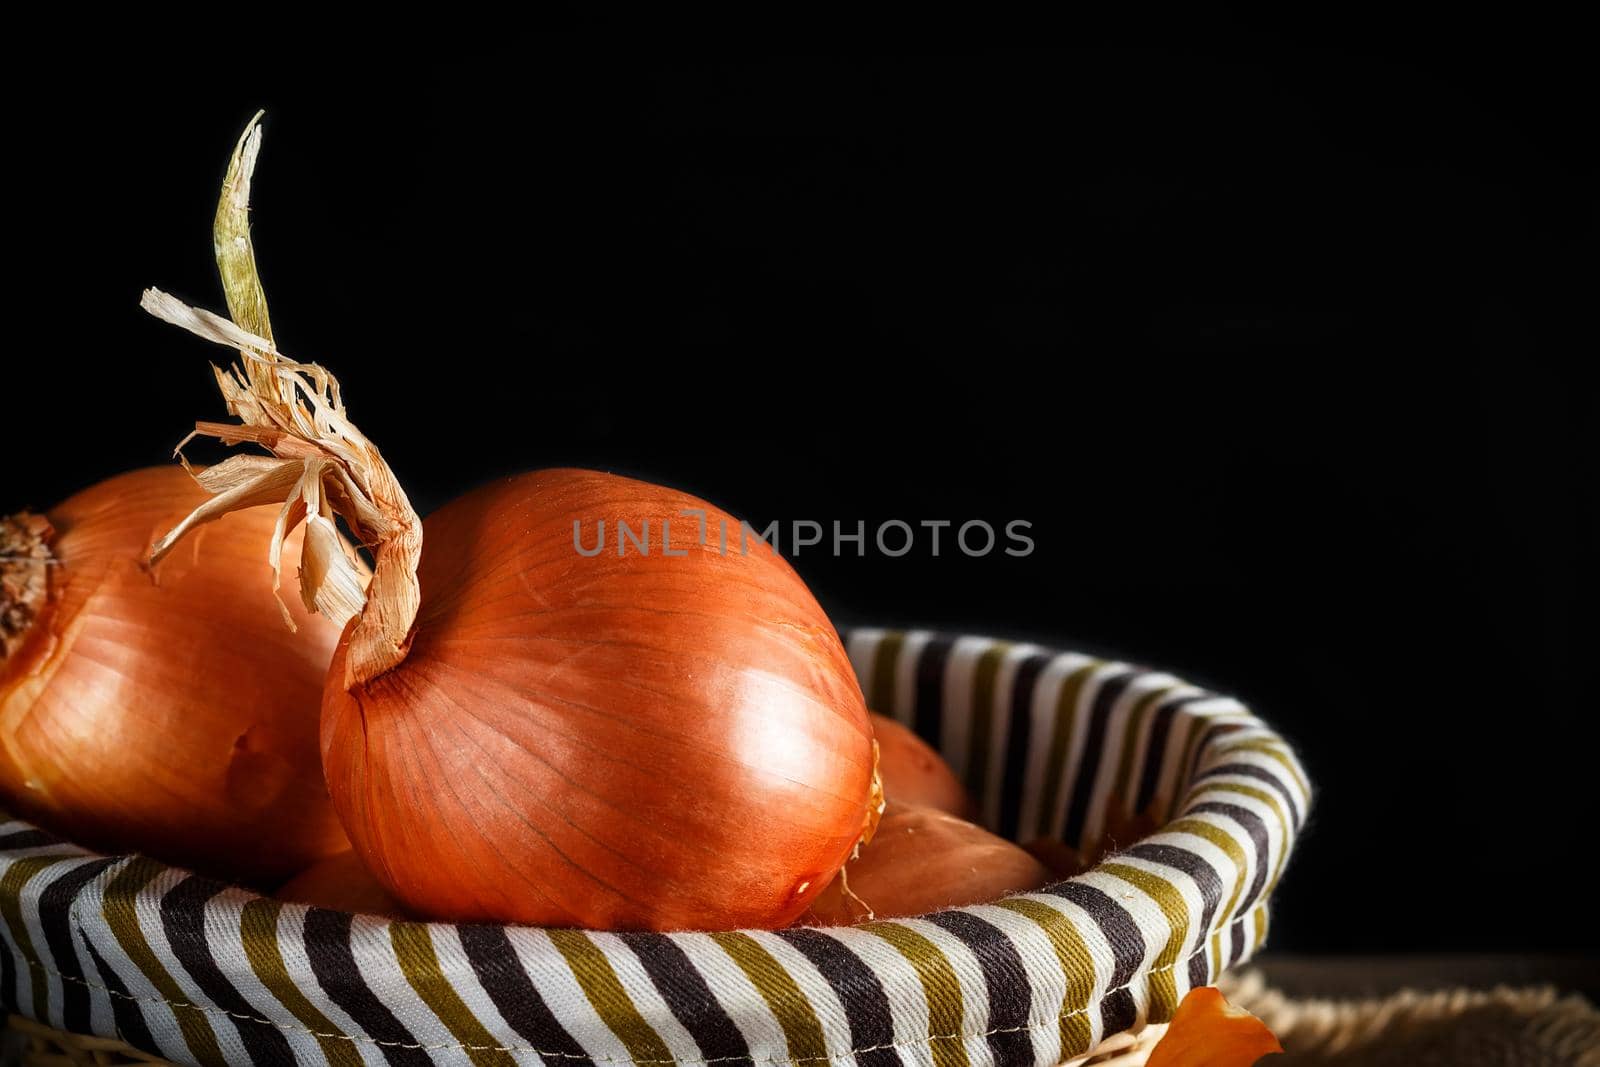 Still life of onions with wicker basket with black background. Rustic style. Horizontal image.